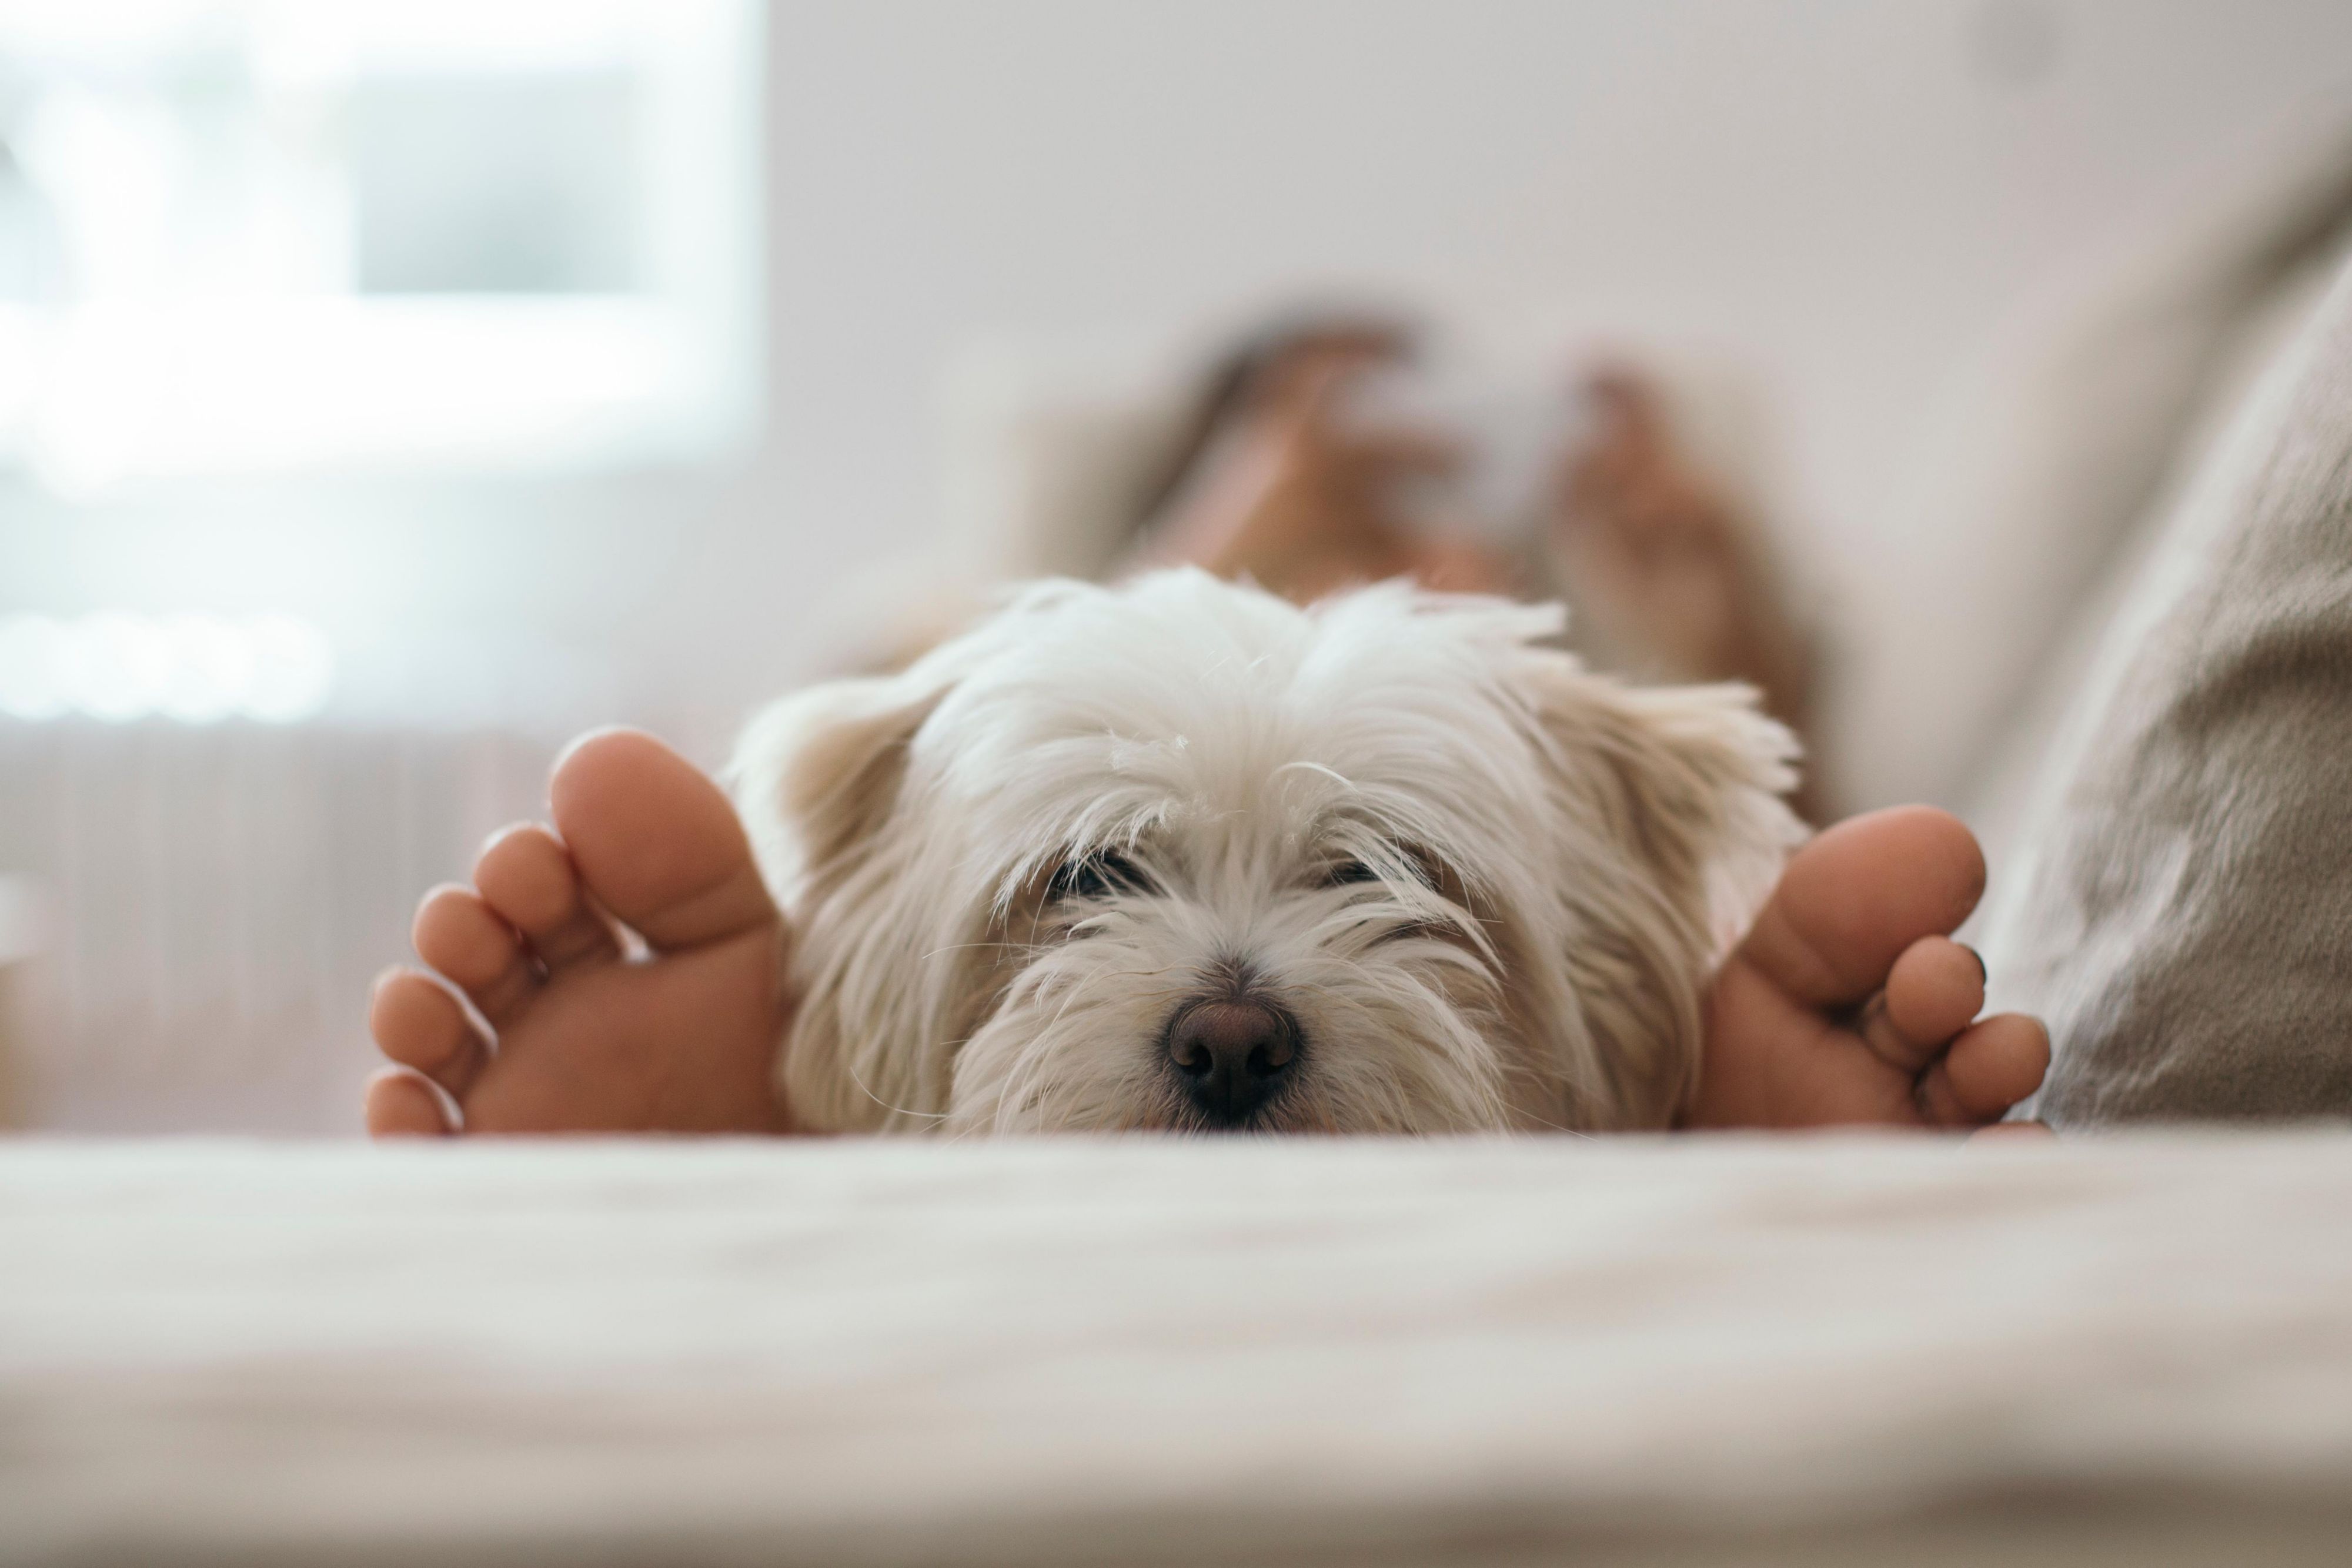 No need to leave your furry friends at home. Our Staybridge Suites is pet friendly. Pet fee of $50 for stays under 6 nights. $75 for stays of 7 to 29 nights. $150 for stays of over 30 nights. Your pet will receive a welcome doggie treat bag. Pet walking area on property with doggie "doodie" bags and trash receptacle.